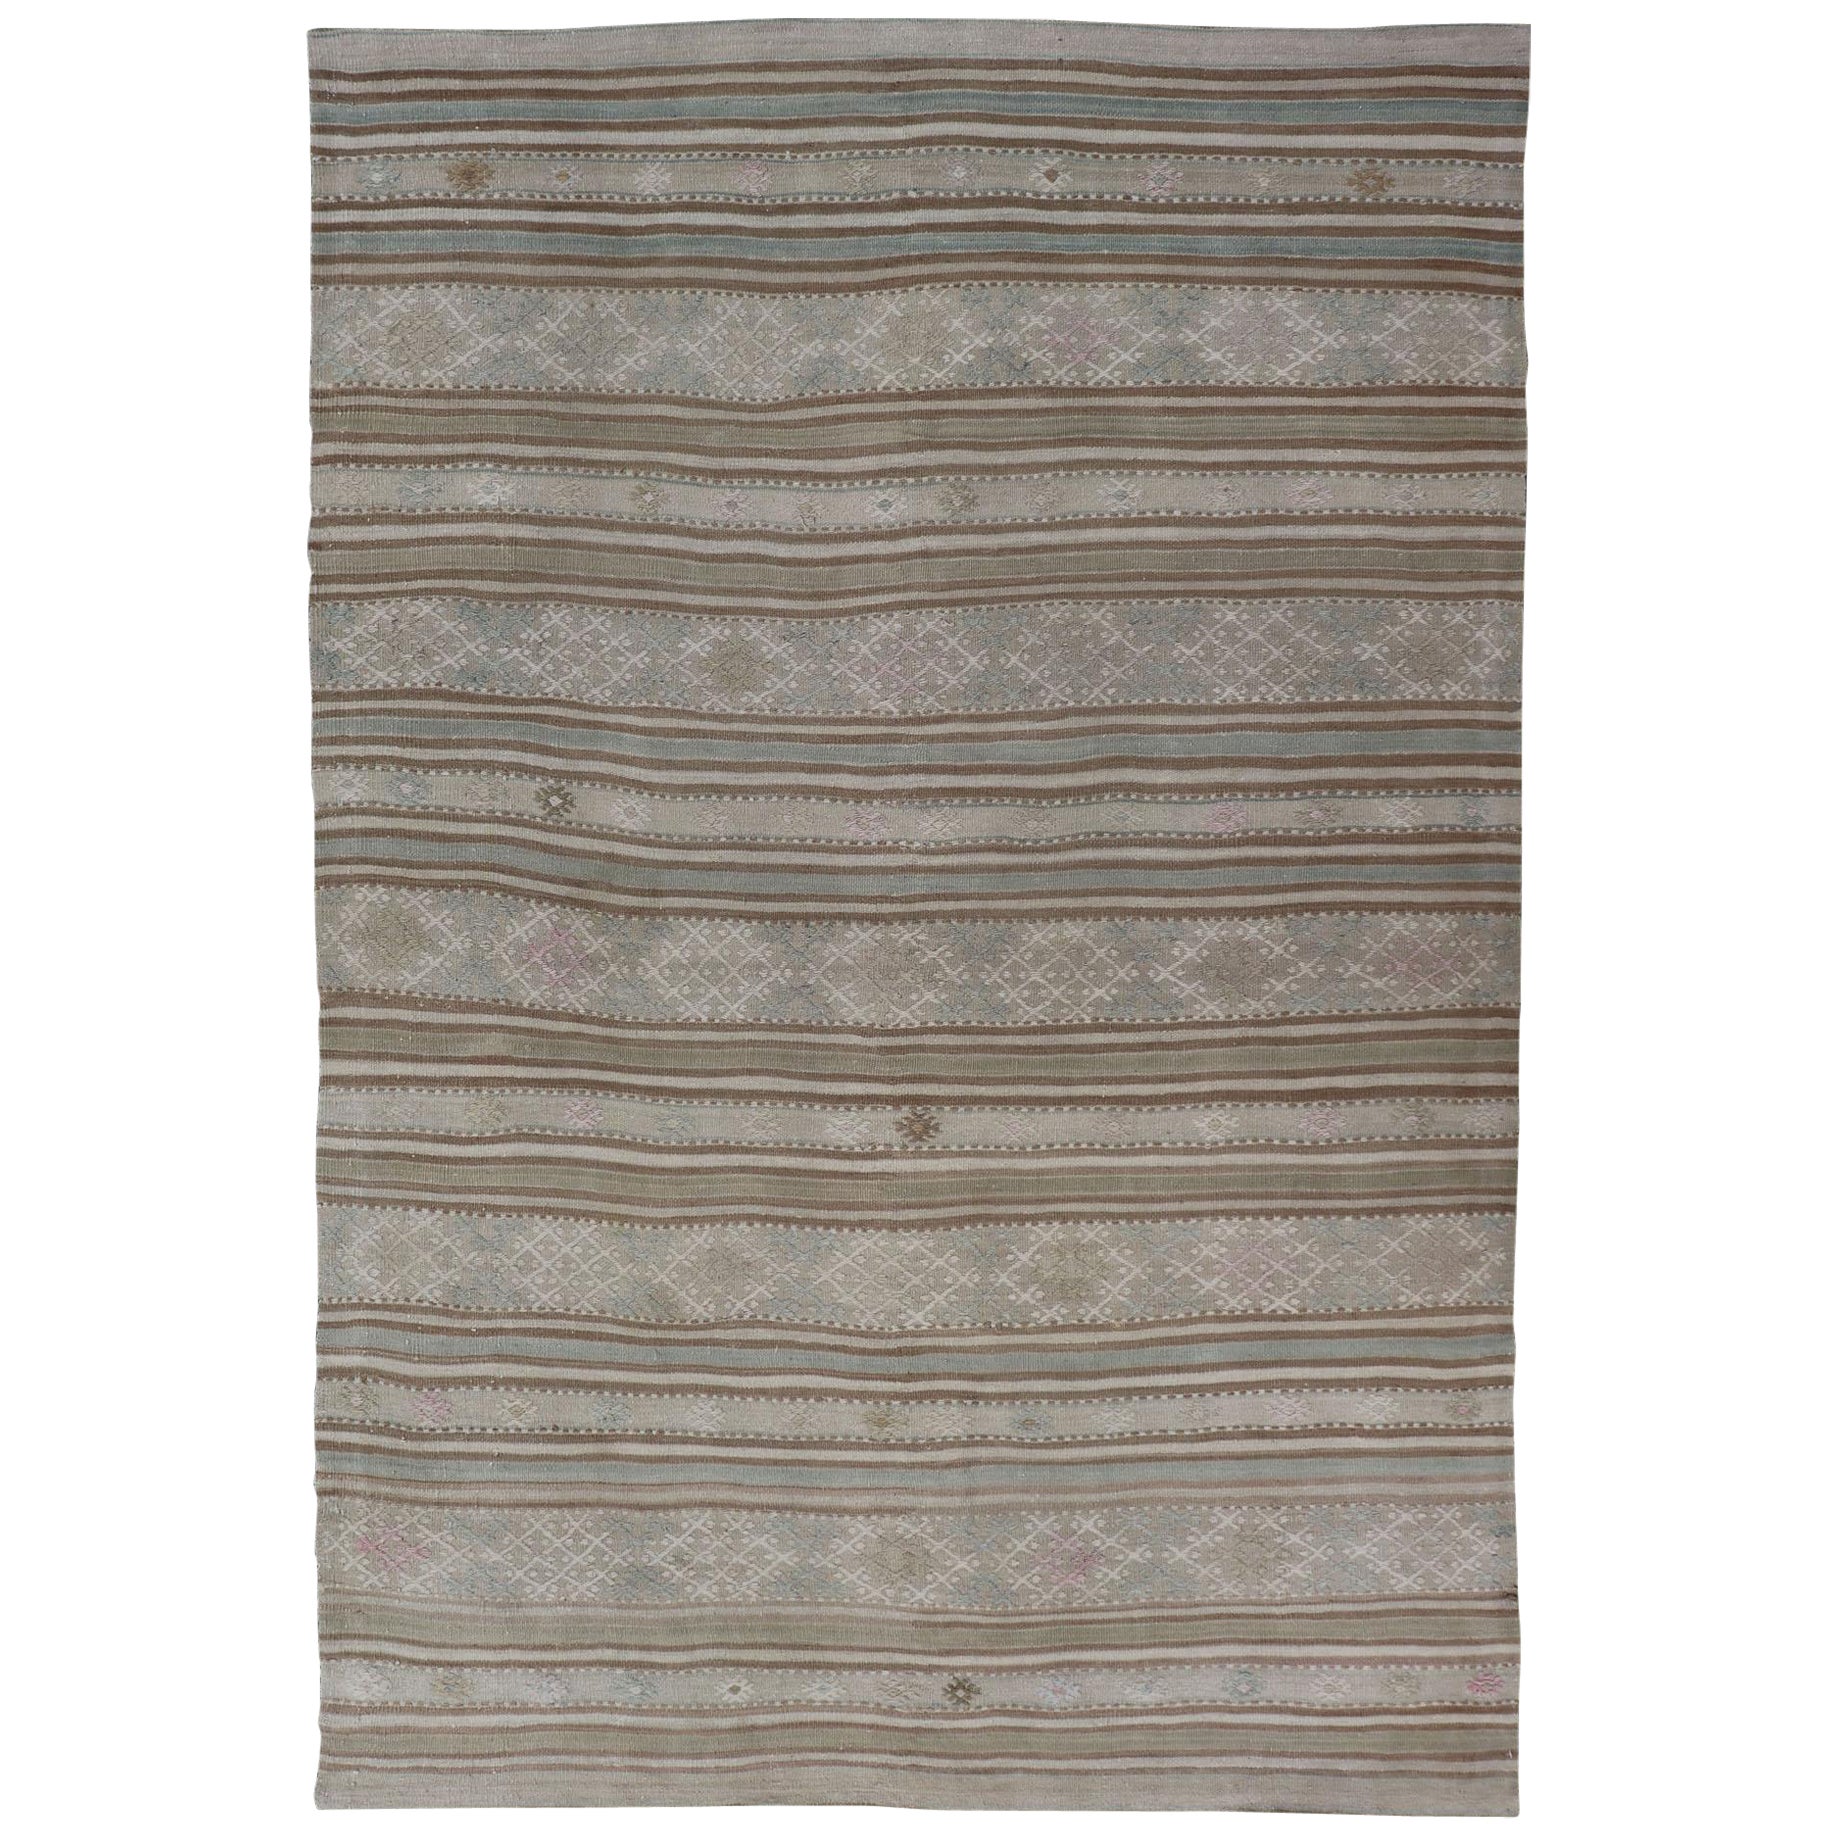 Flat-Weave Embroideries Kilim in Taupe, Green, Teal, Blue and Brown